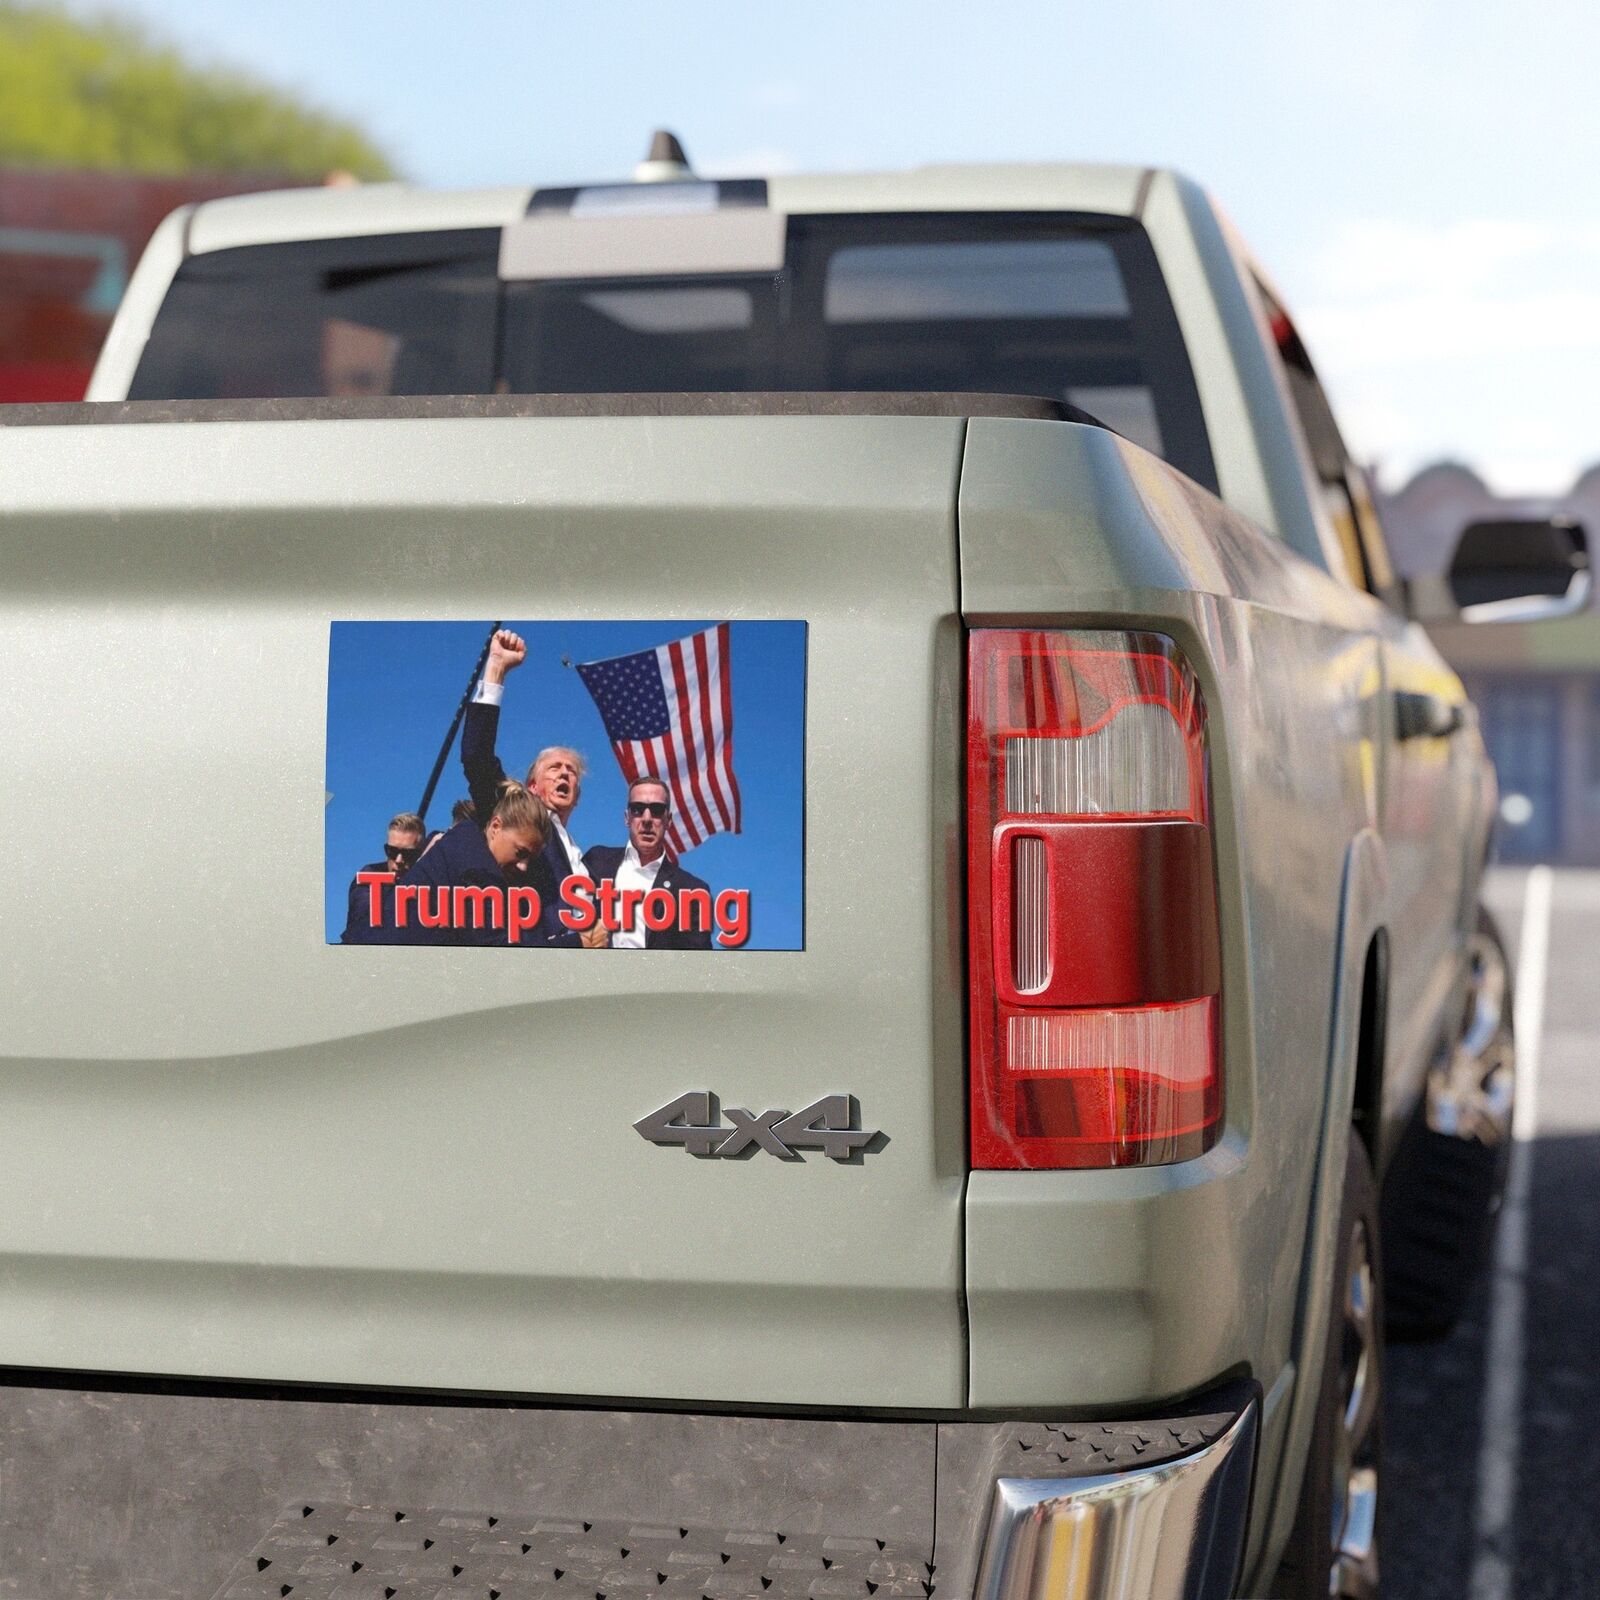 Trump Strong Car Magnets